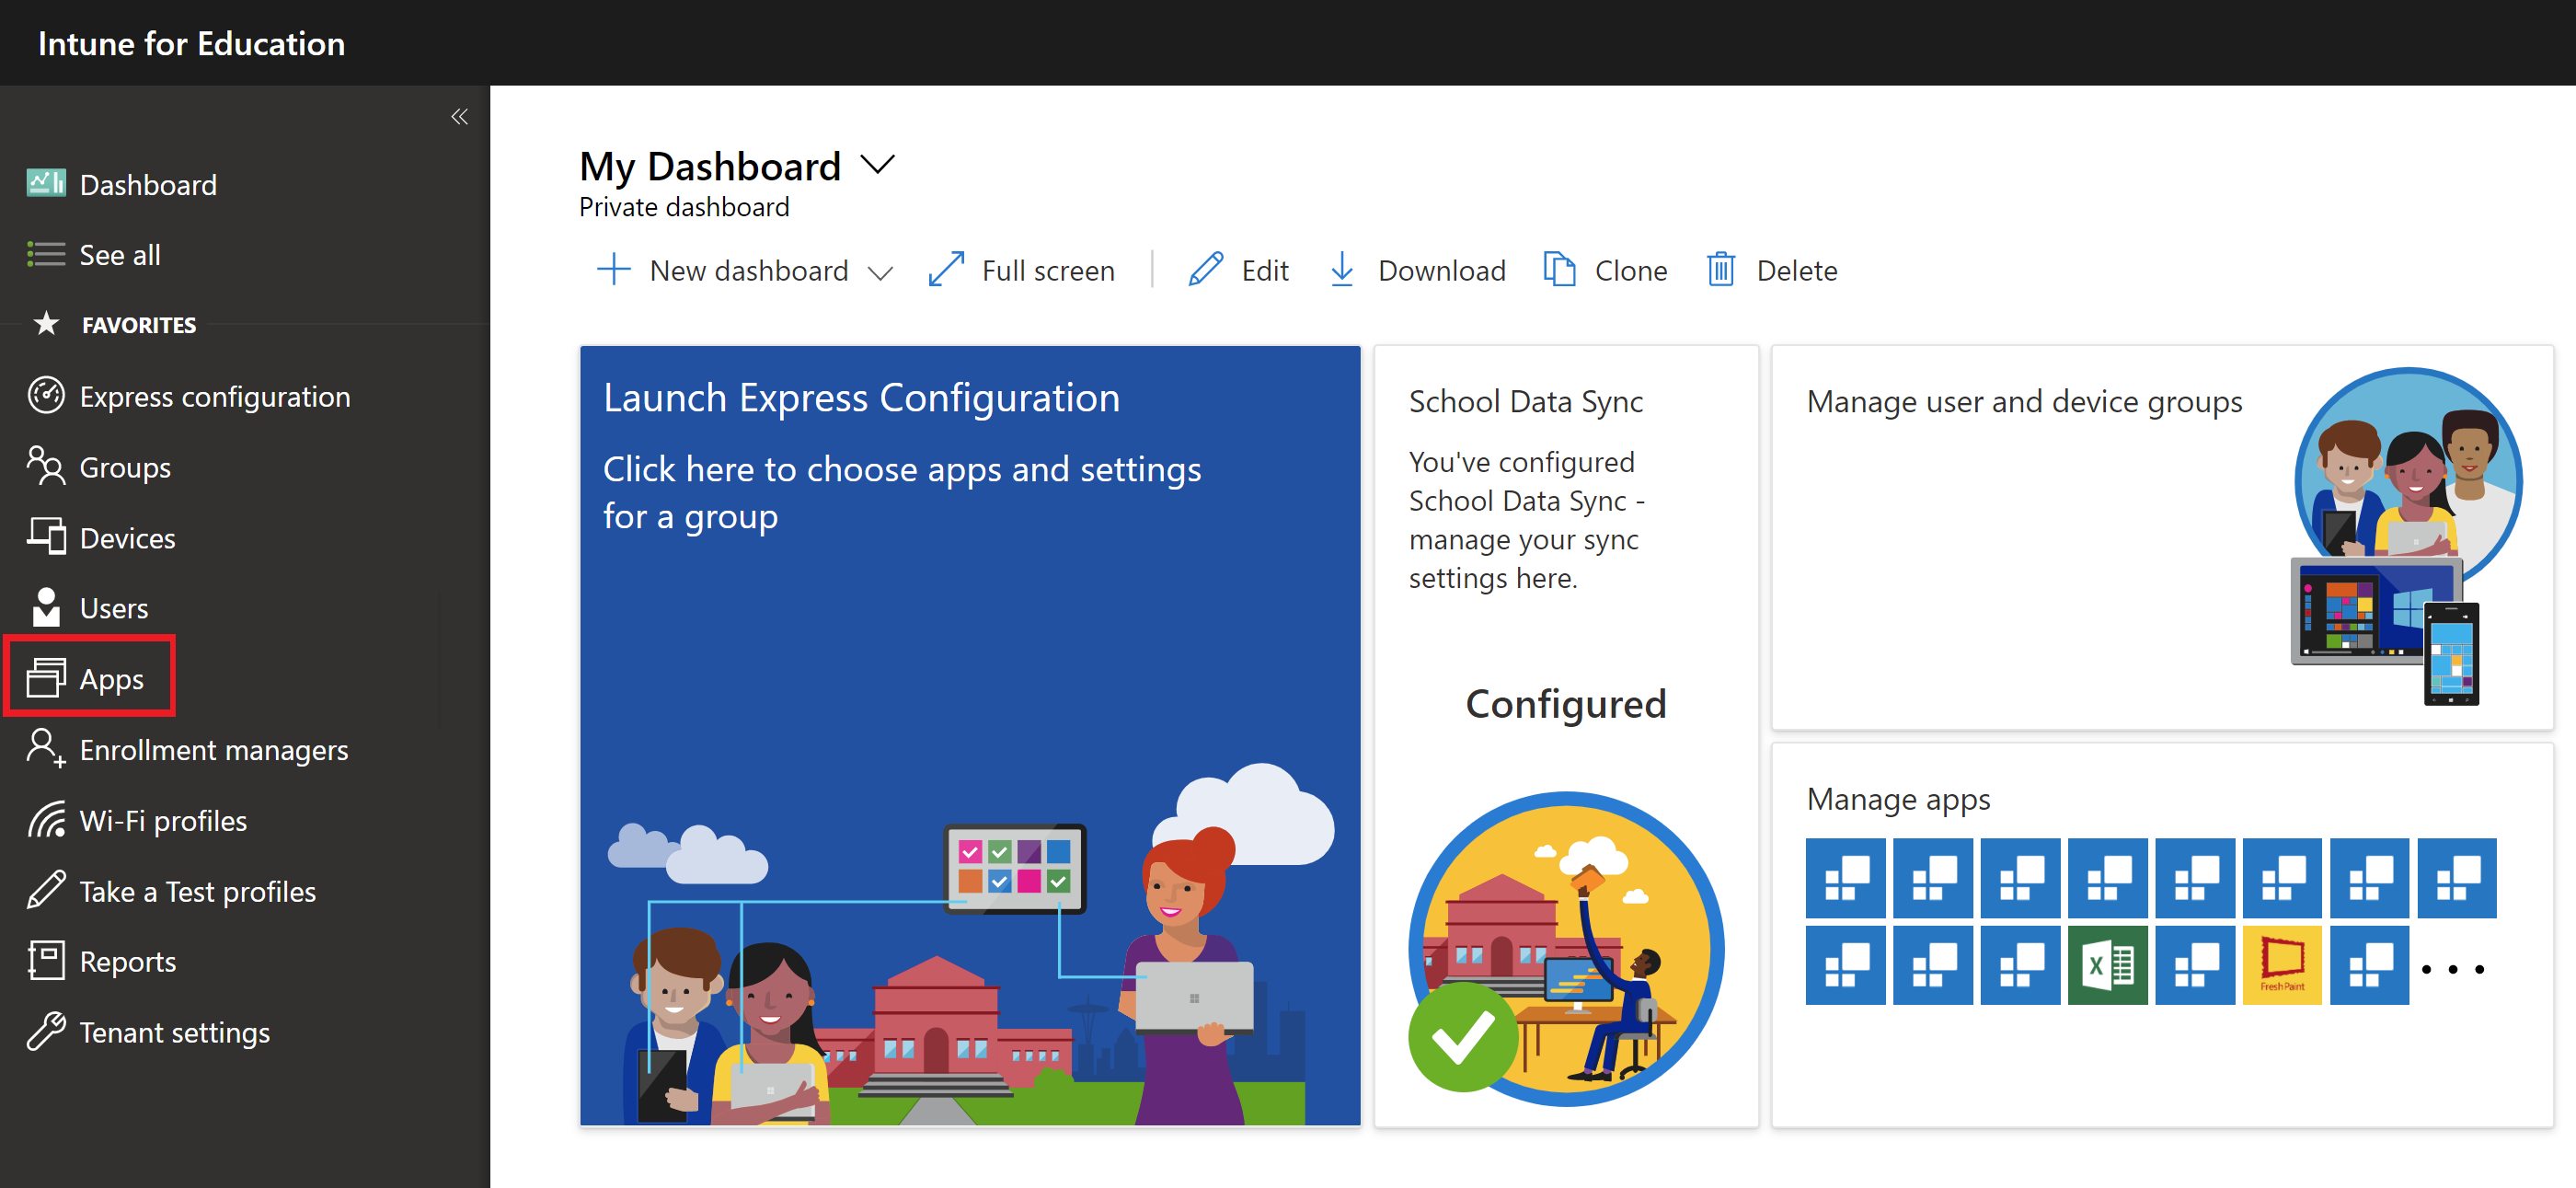 Screenshot of Intune for Education Apps.